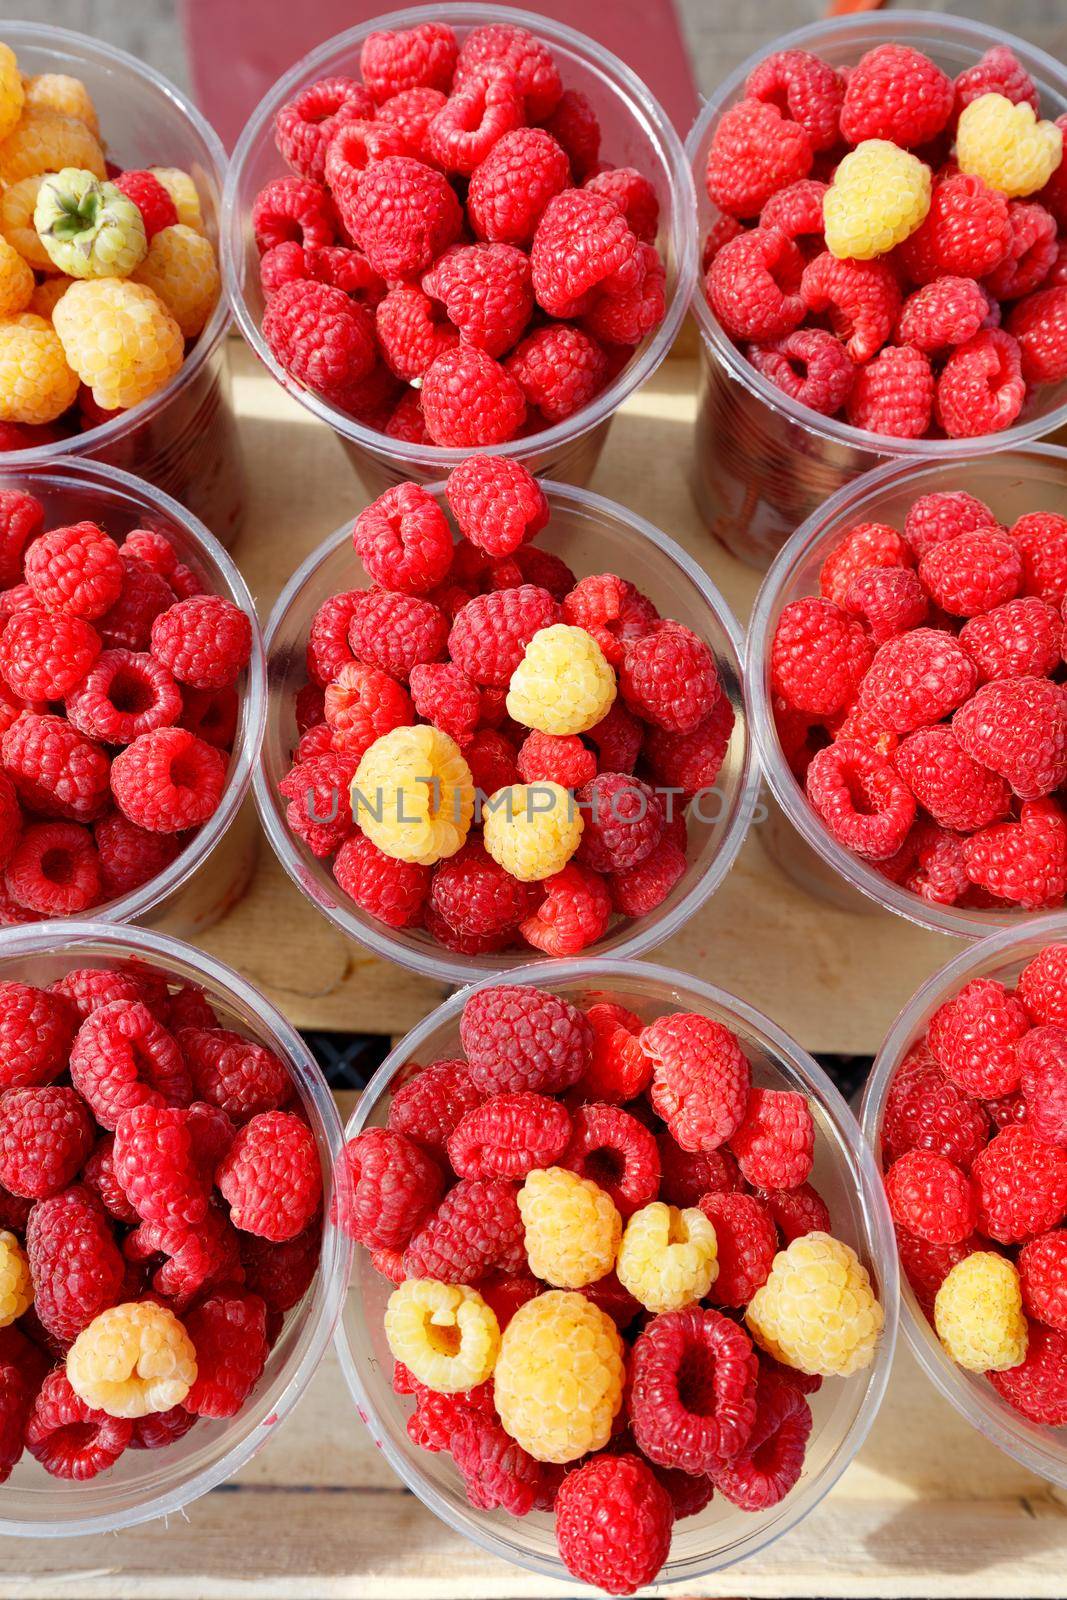 Red and yellow ripe raspberries are sold at street markets in plastic cups, top view.